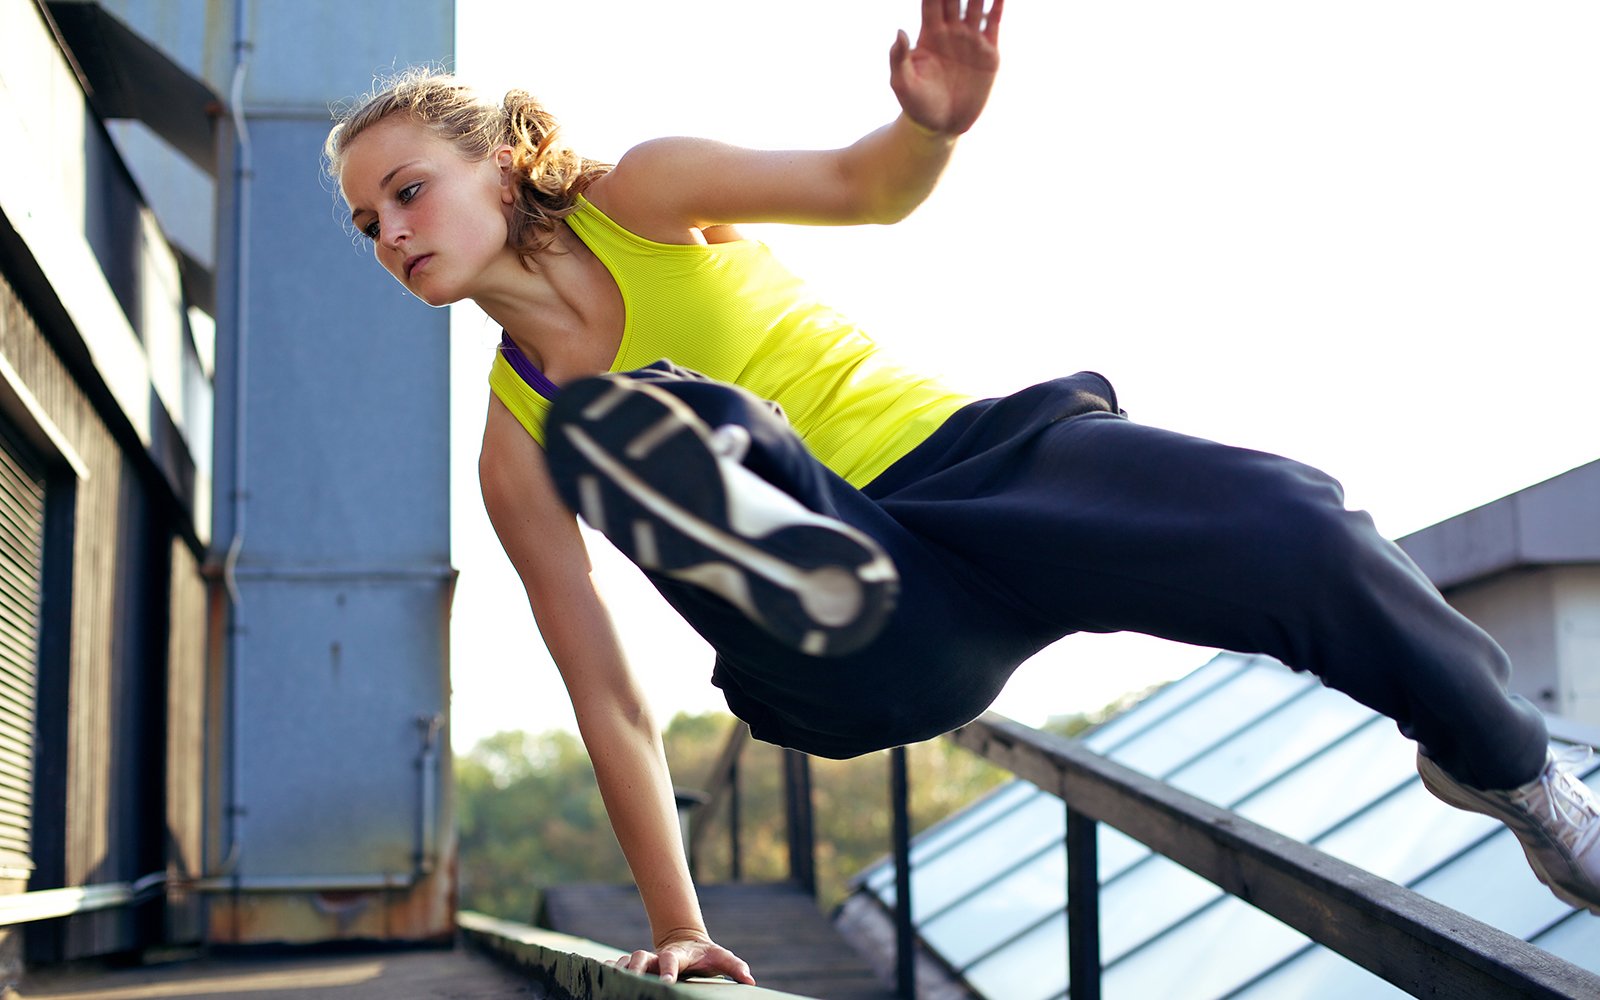 Slay Parkour With These Killer Outdoor Exercises